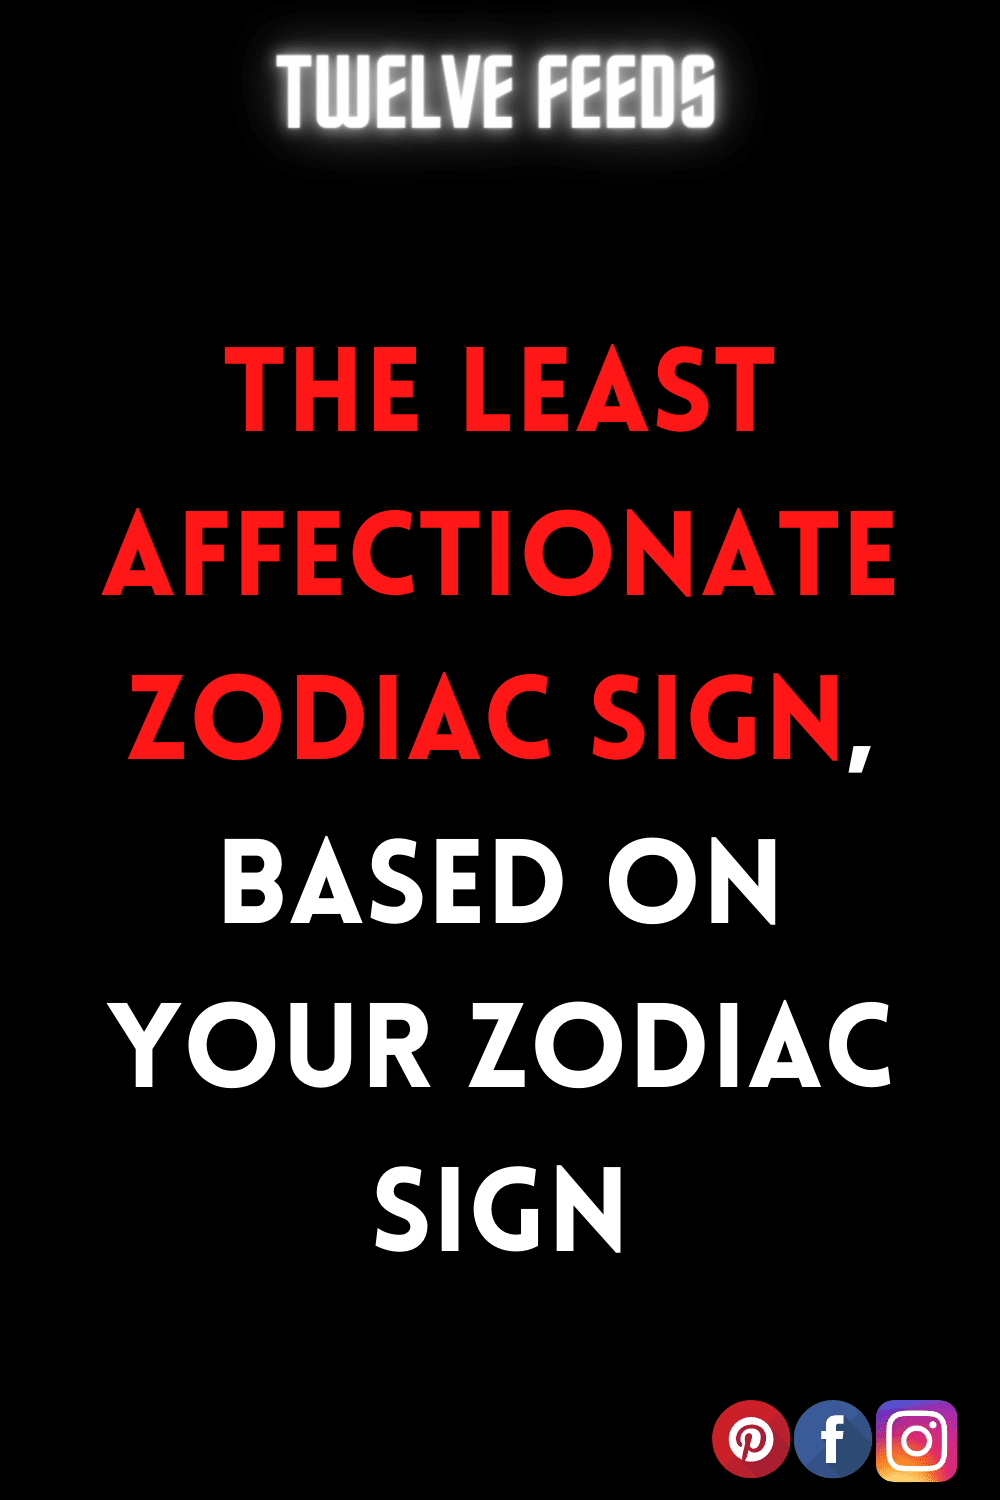 The Least Affectionate Zodiac Sign, based On Your Zodiac Sign